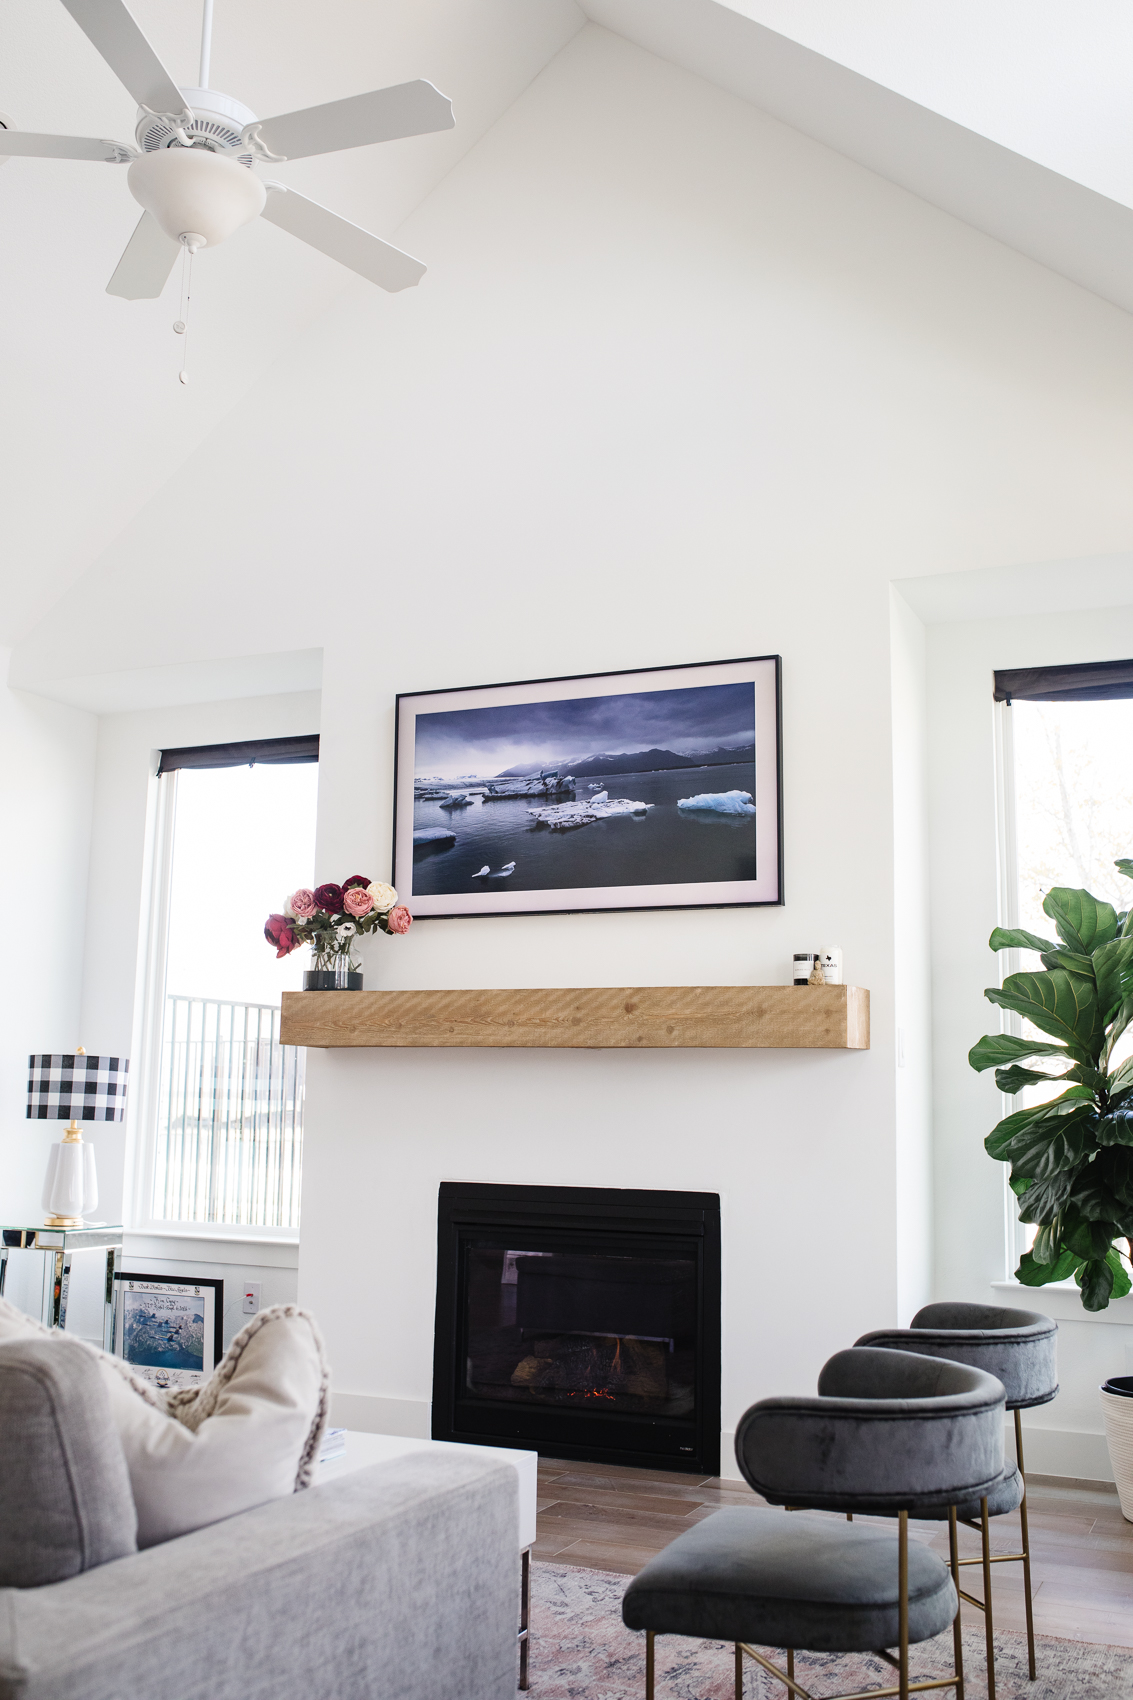 Blogger Hoang-Kim Cung shares her Samsung Frame TV review from her transitional living room in Dallas, Texas